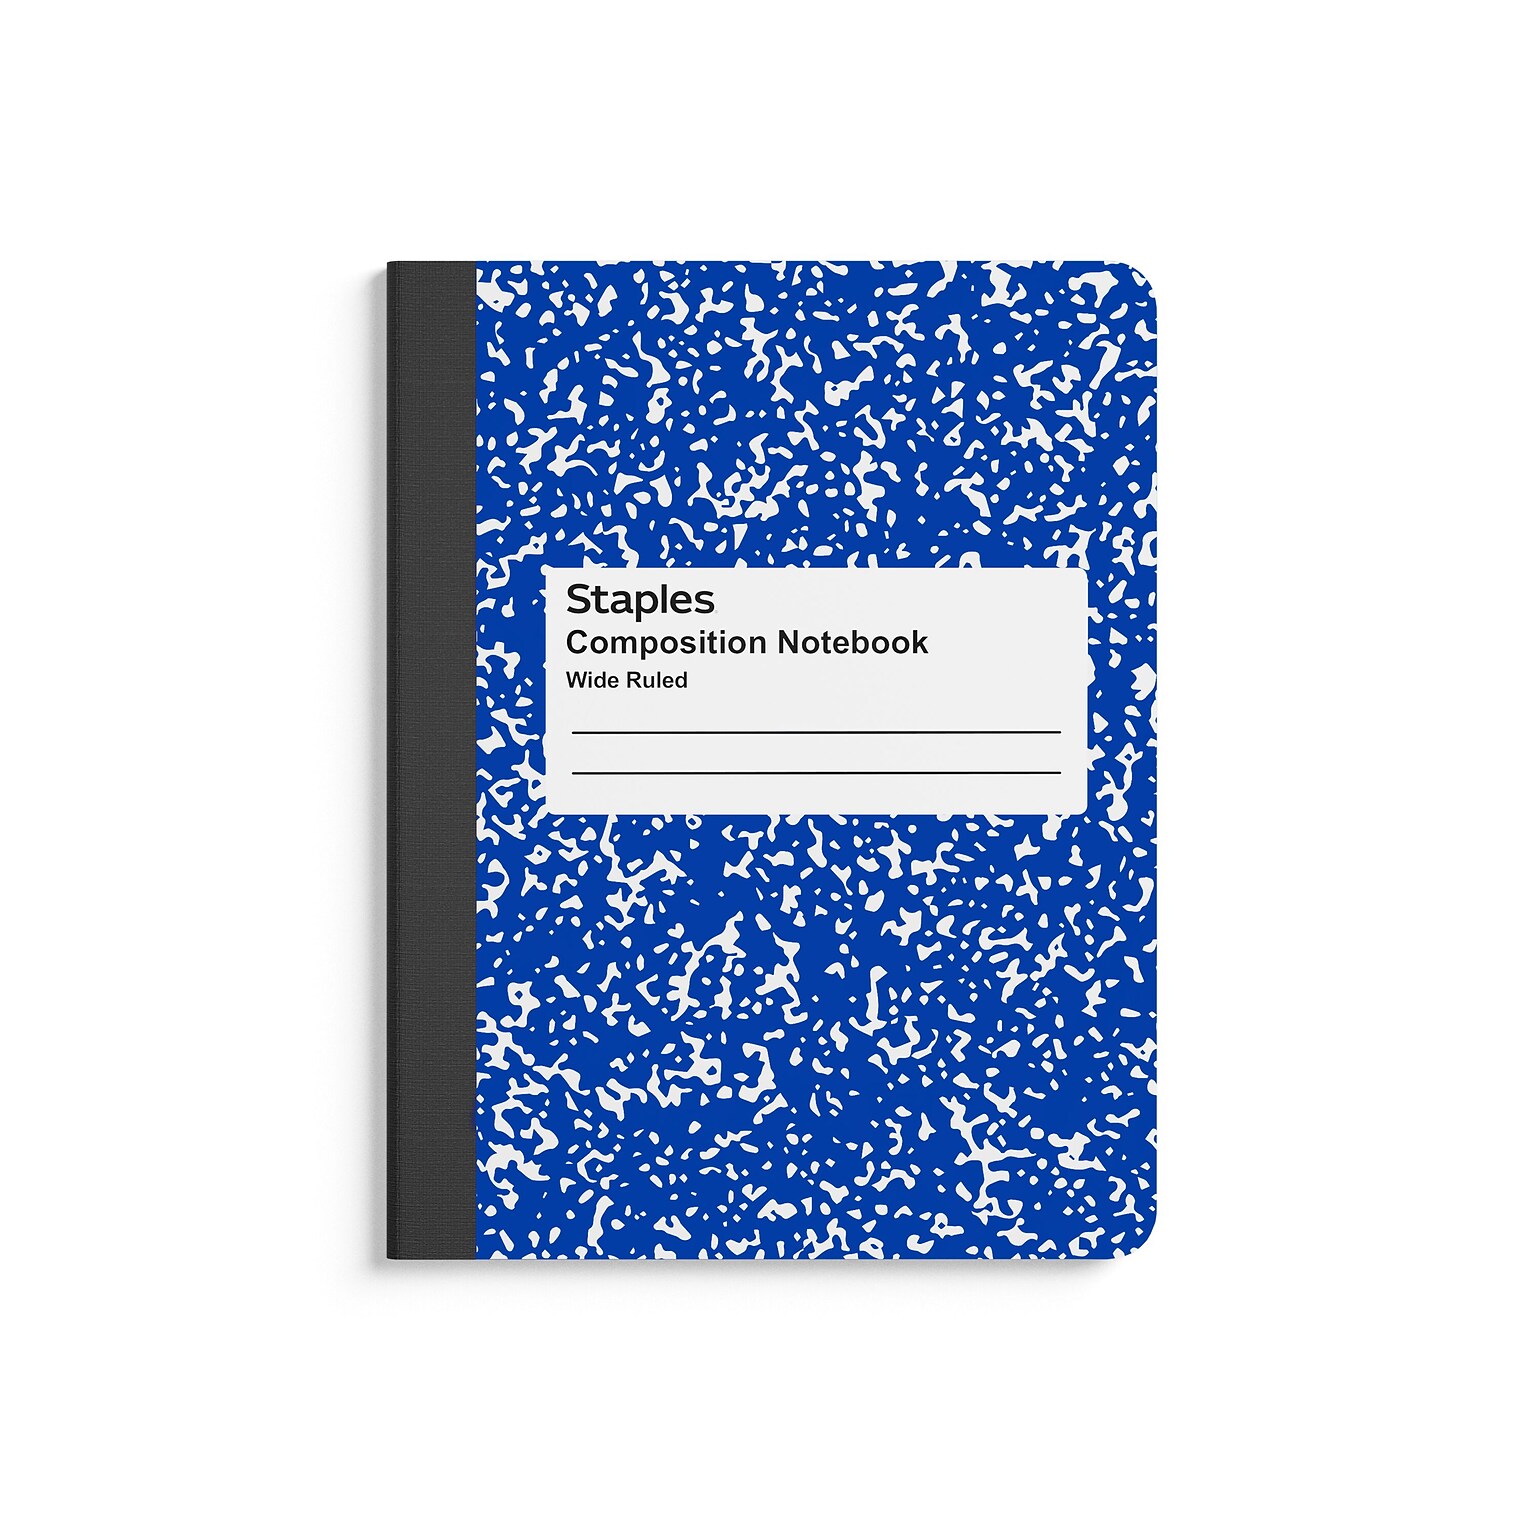 Staples™ Composition Notebook, 7.5 x 9.75, Wide Ruled, 80 Sheets, Blue/White, 24 Notebooks/Carton (55ST063CT)